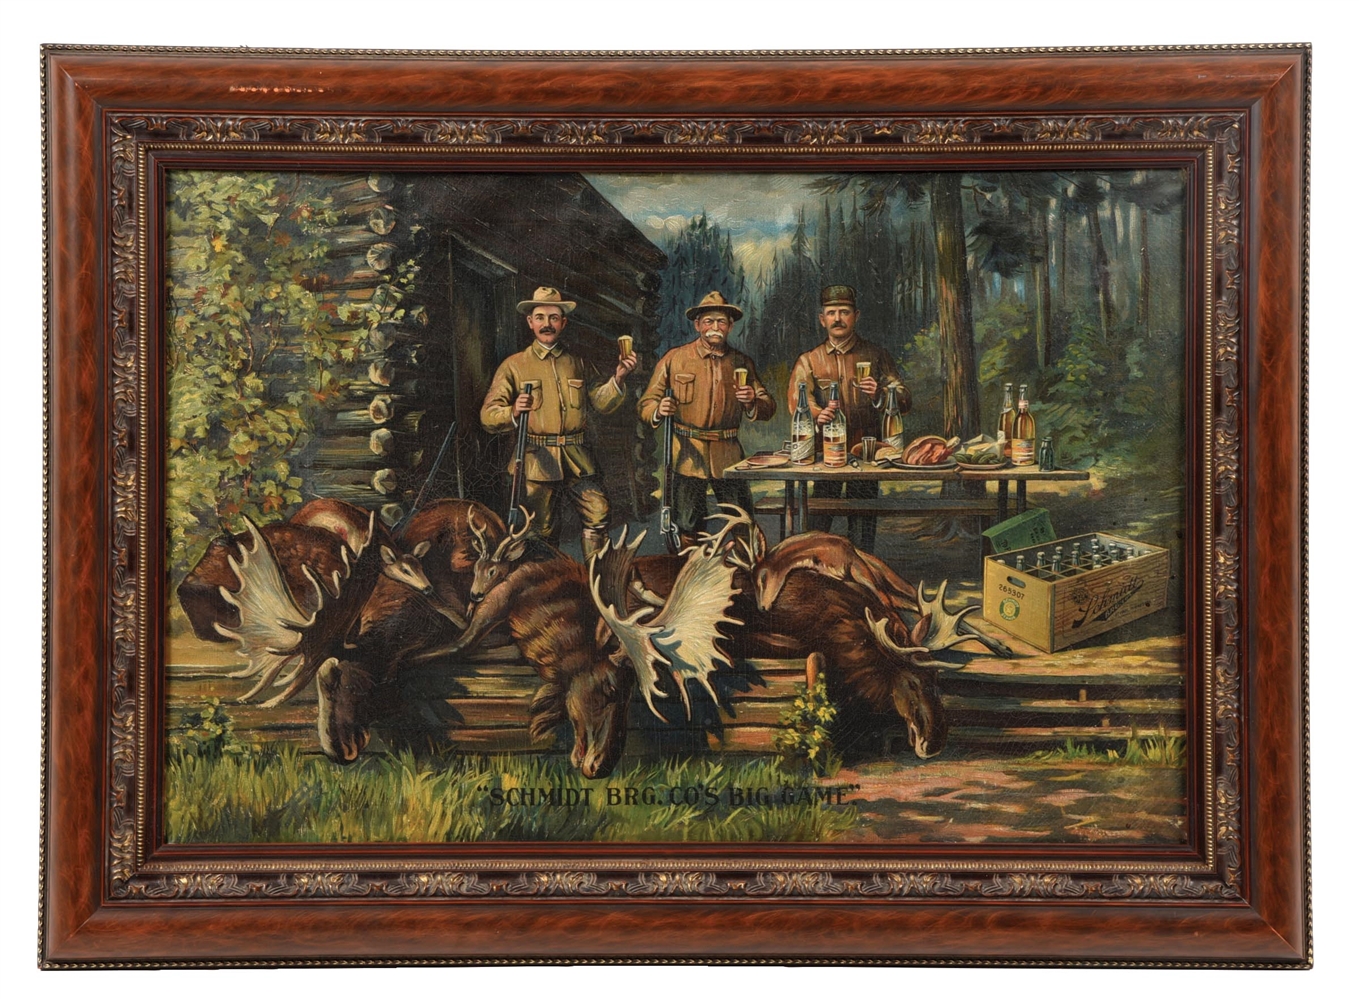 SCHMIDT BRG. CO.S BIG GAME CANVAS PAINTING W/ HUNTING GRAPHIC.